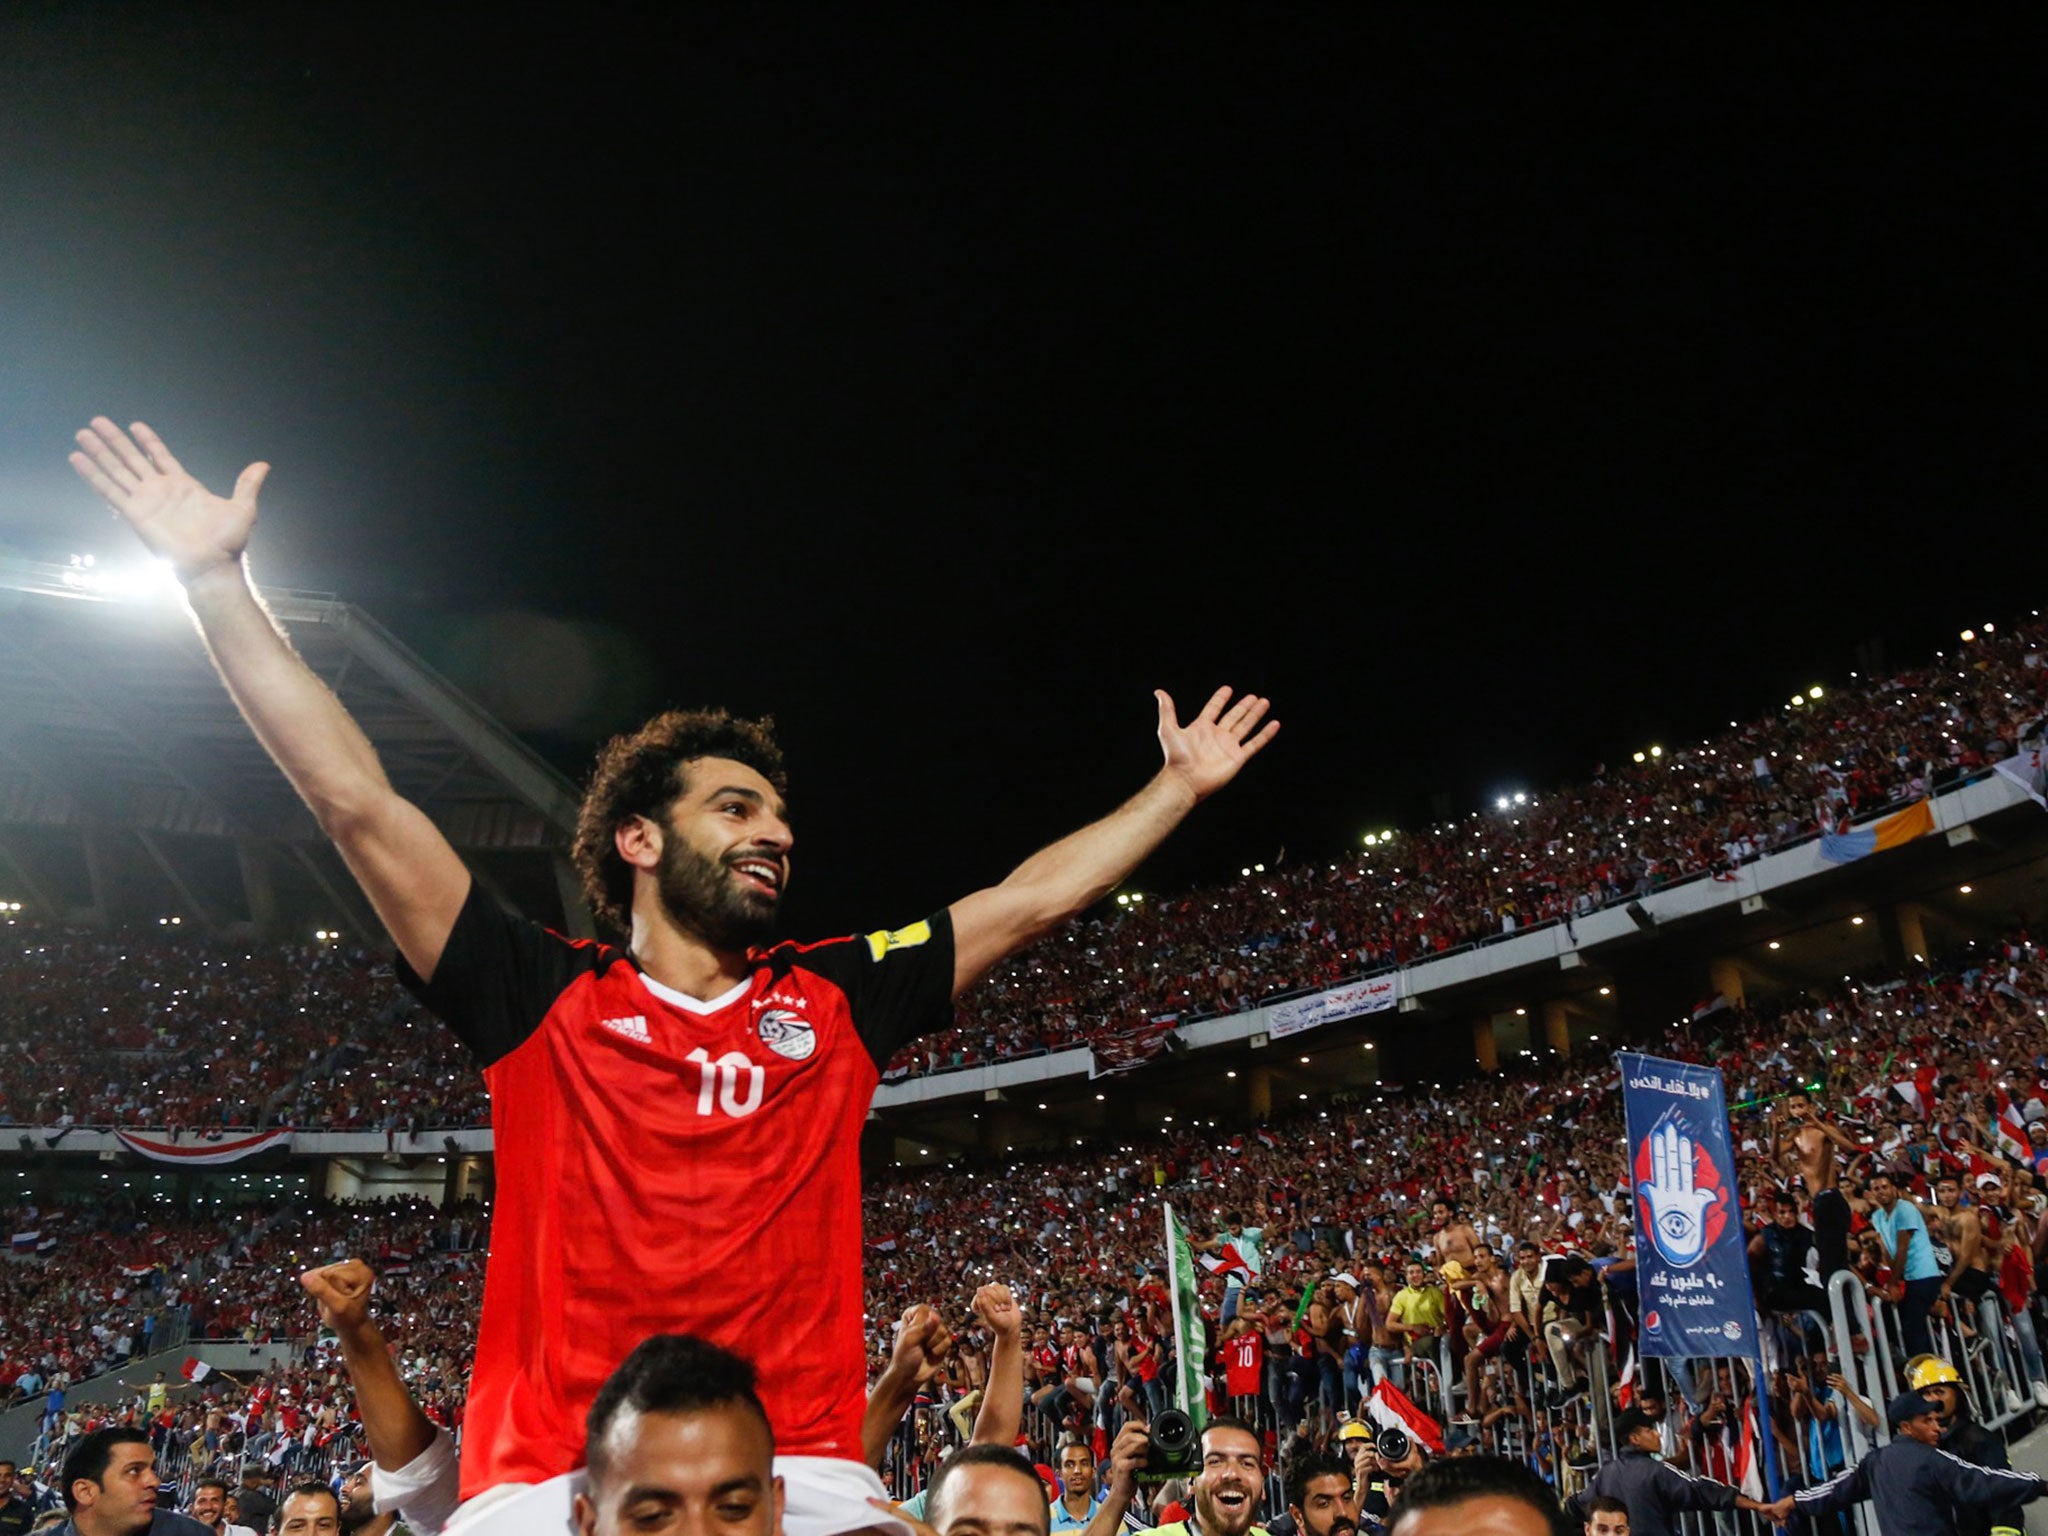 Mohamed Salah helped guide Egypt to the World Cup